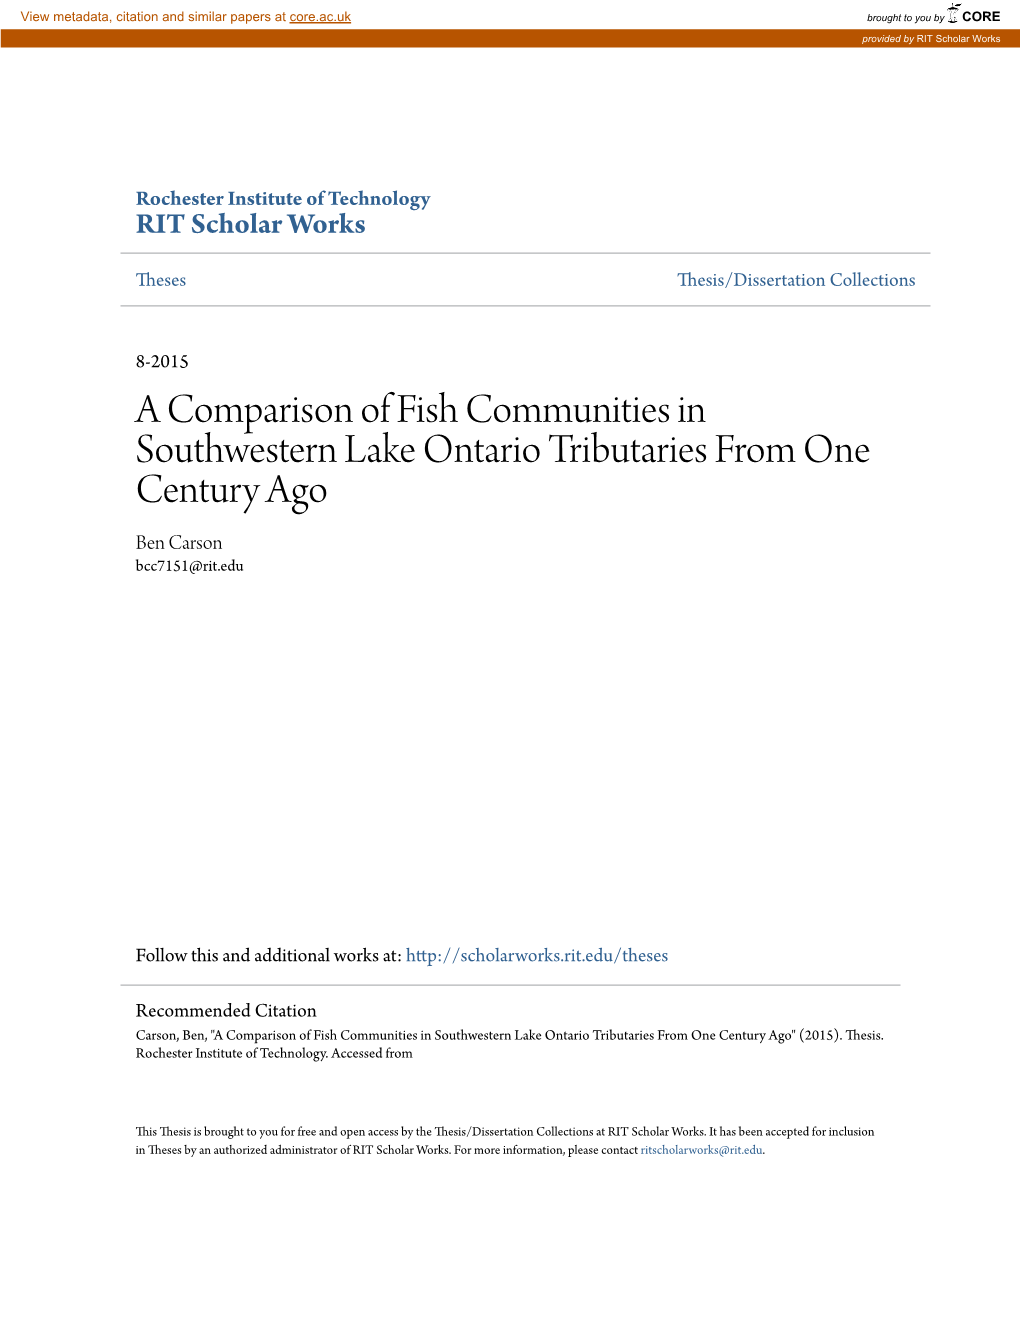 A Comparison of Fish Communities in Southwestern Lake Ontario Tributaries from One Century Ago Ben Carson Bcc7151@Rit.Edu